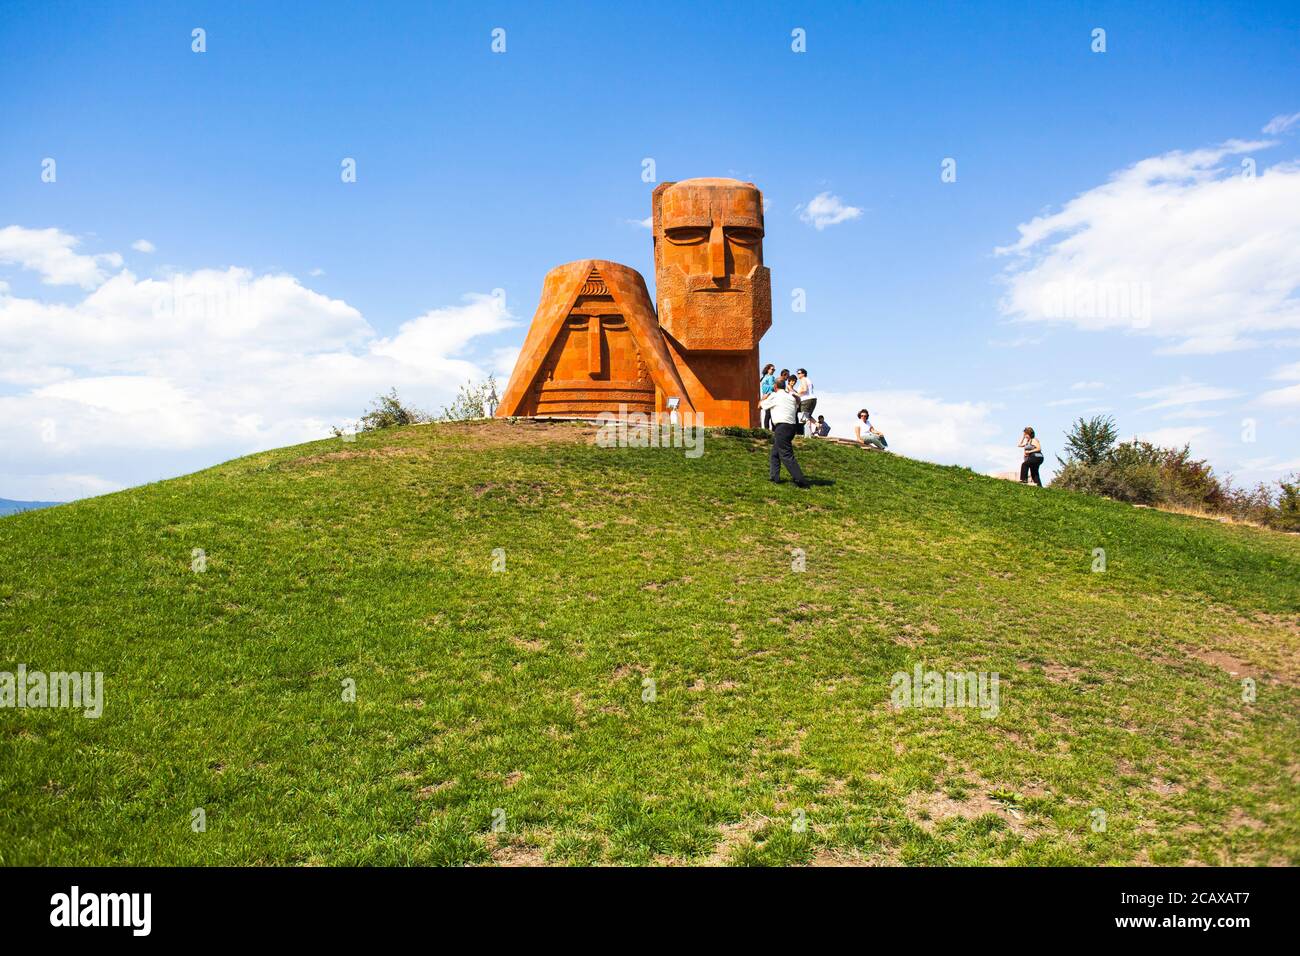 We Are Our Mountains in Stepanakert, Nagorno-Karabakh (Artsakh) Stock Photo